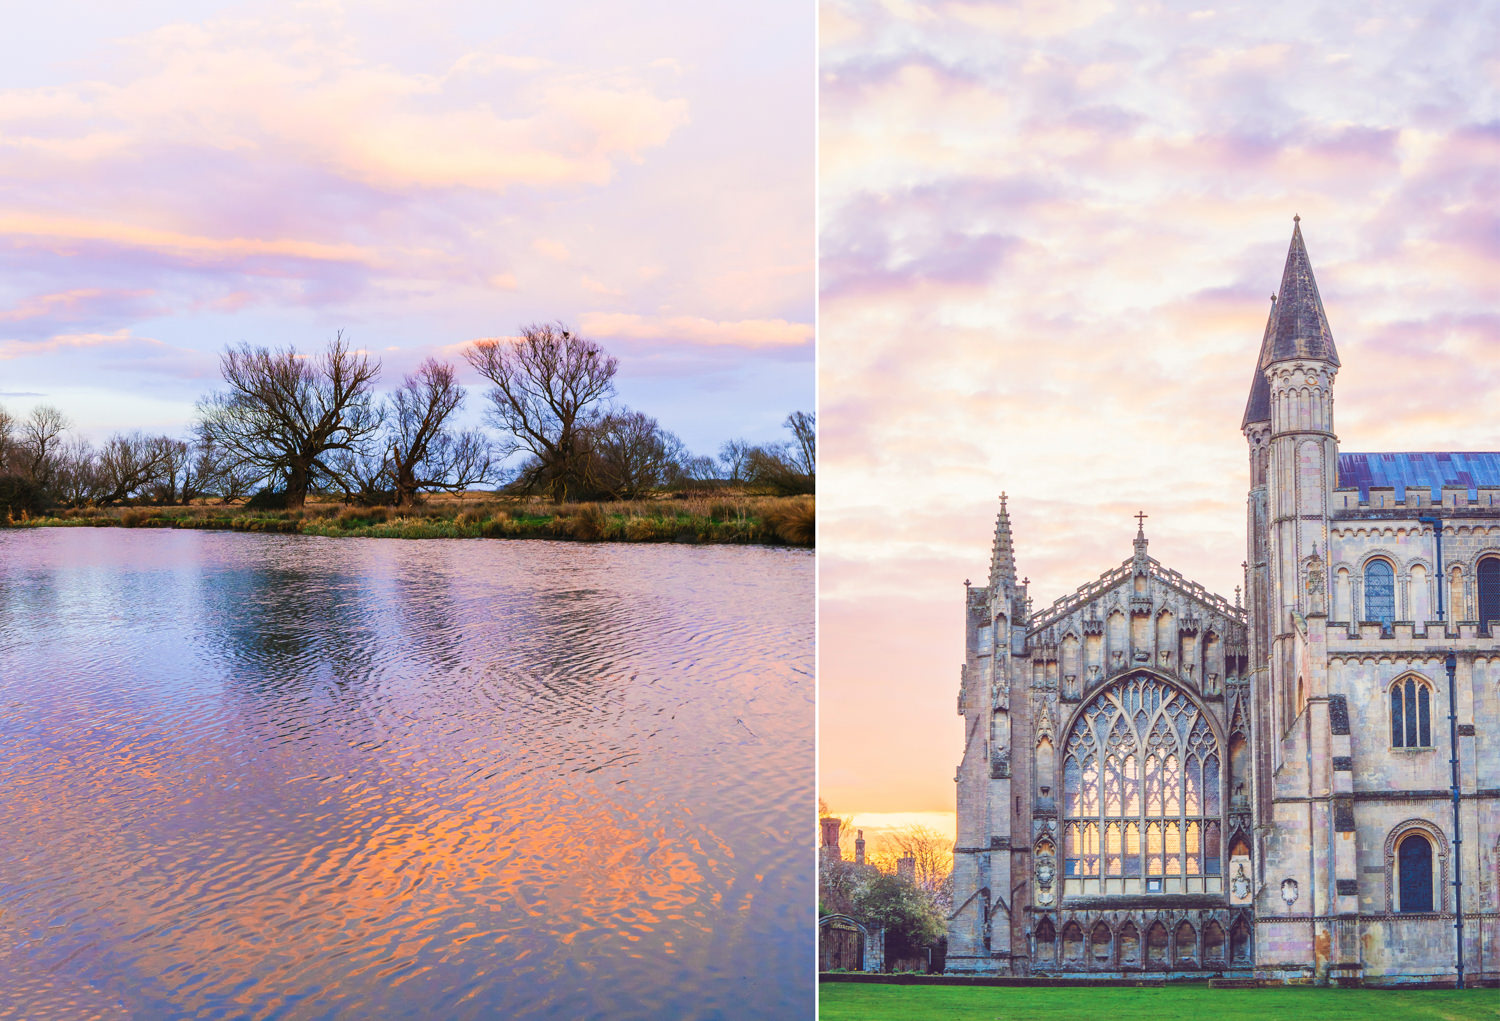 Two pictures, one of Ely Cathedral and the other a river at sunset